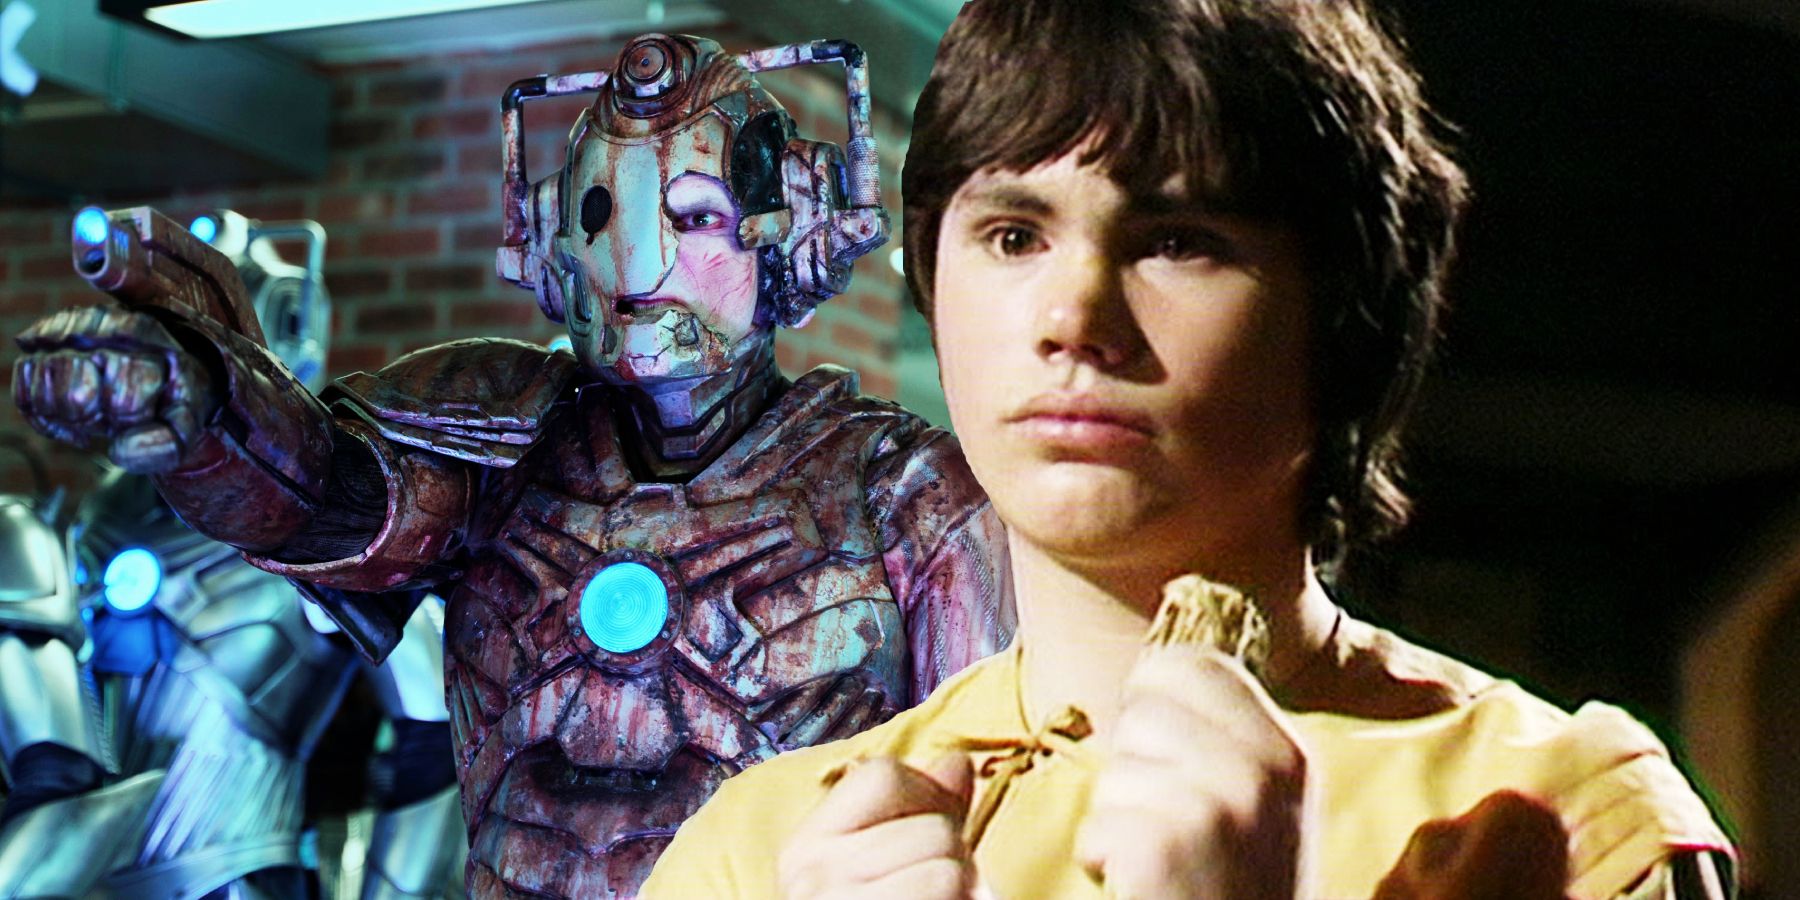 The Lone Cyberman and Adric's death in Doctor Who